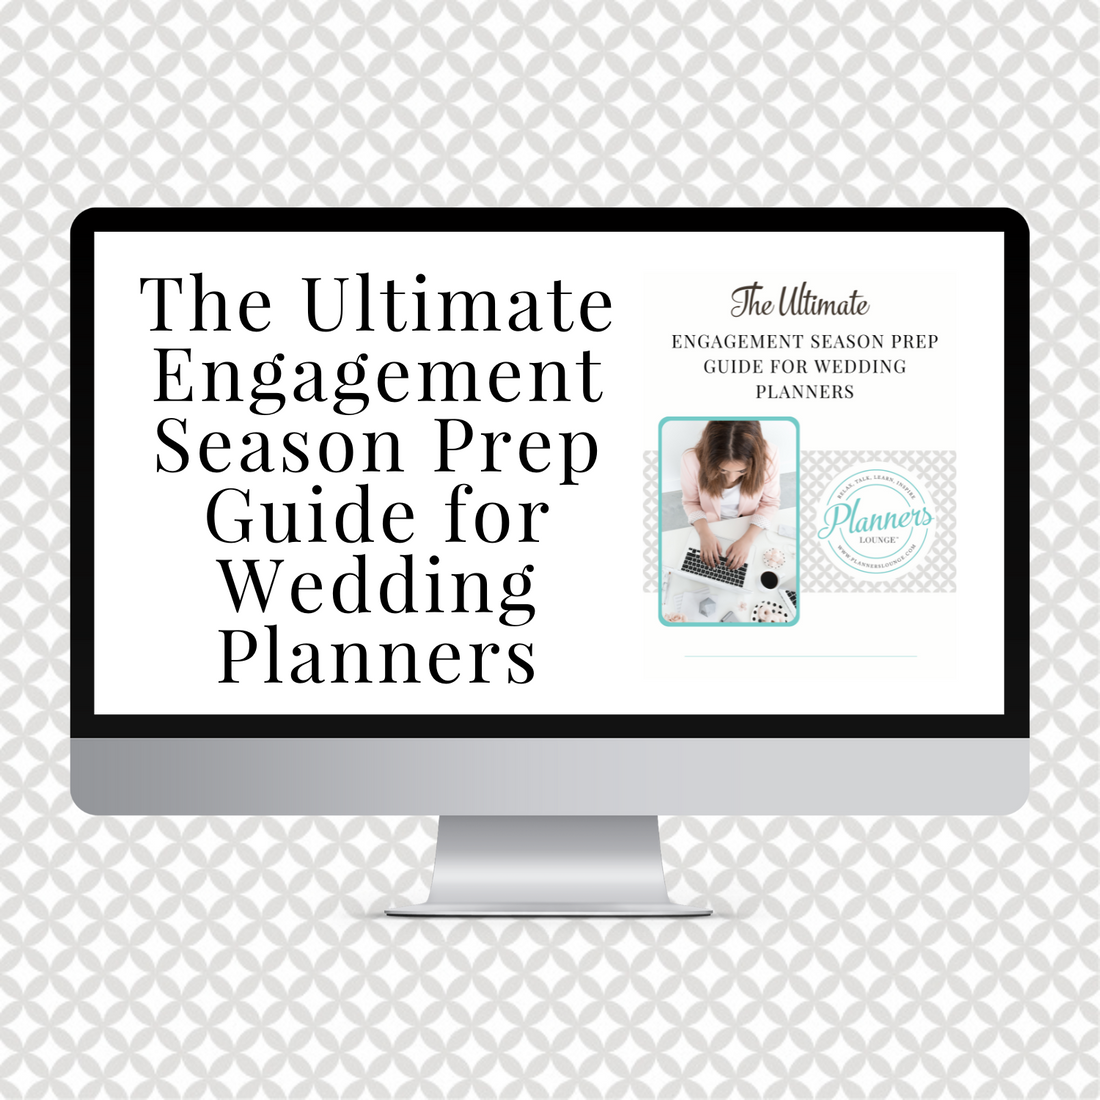 The Ultimate Engagement Season Prep Guide for Wedding Planners